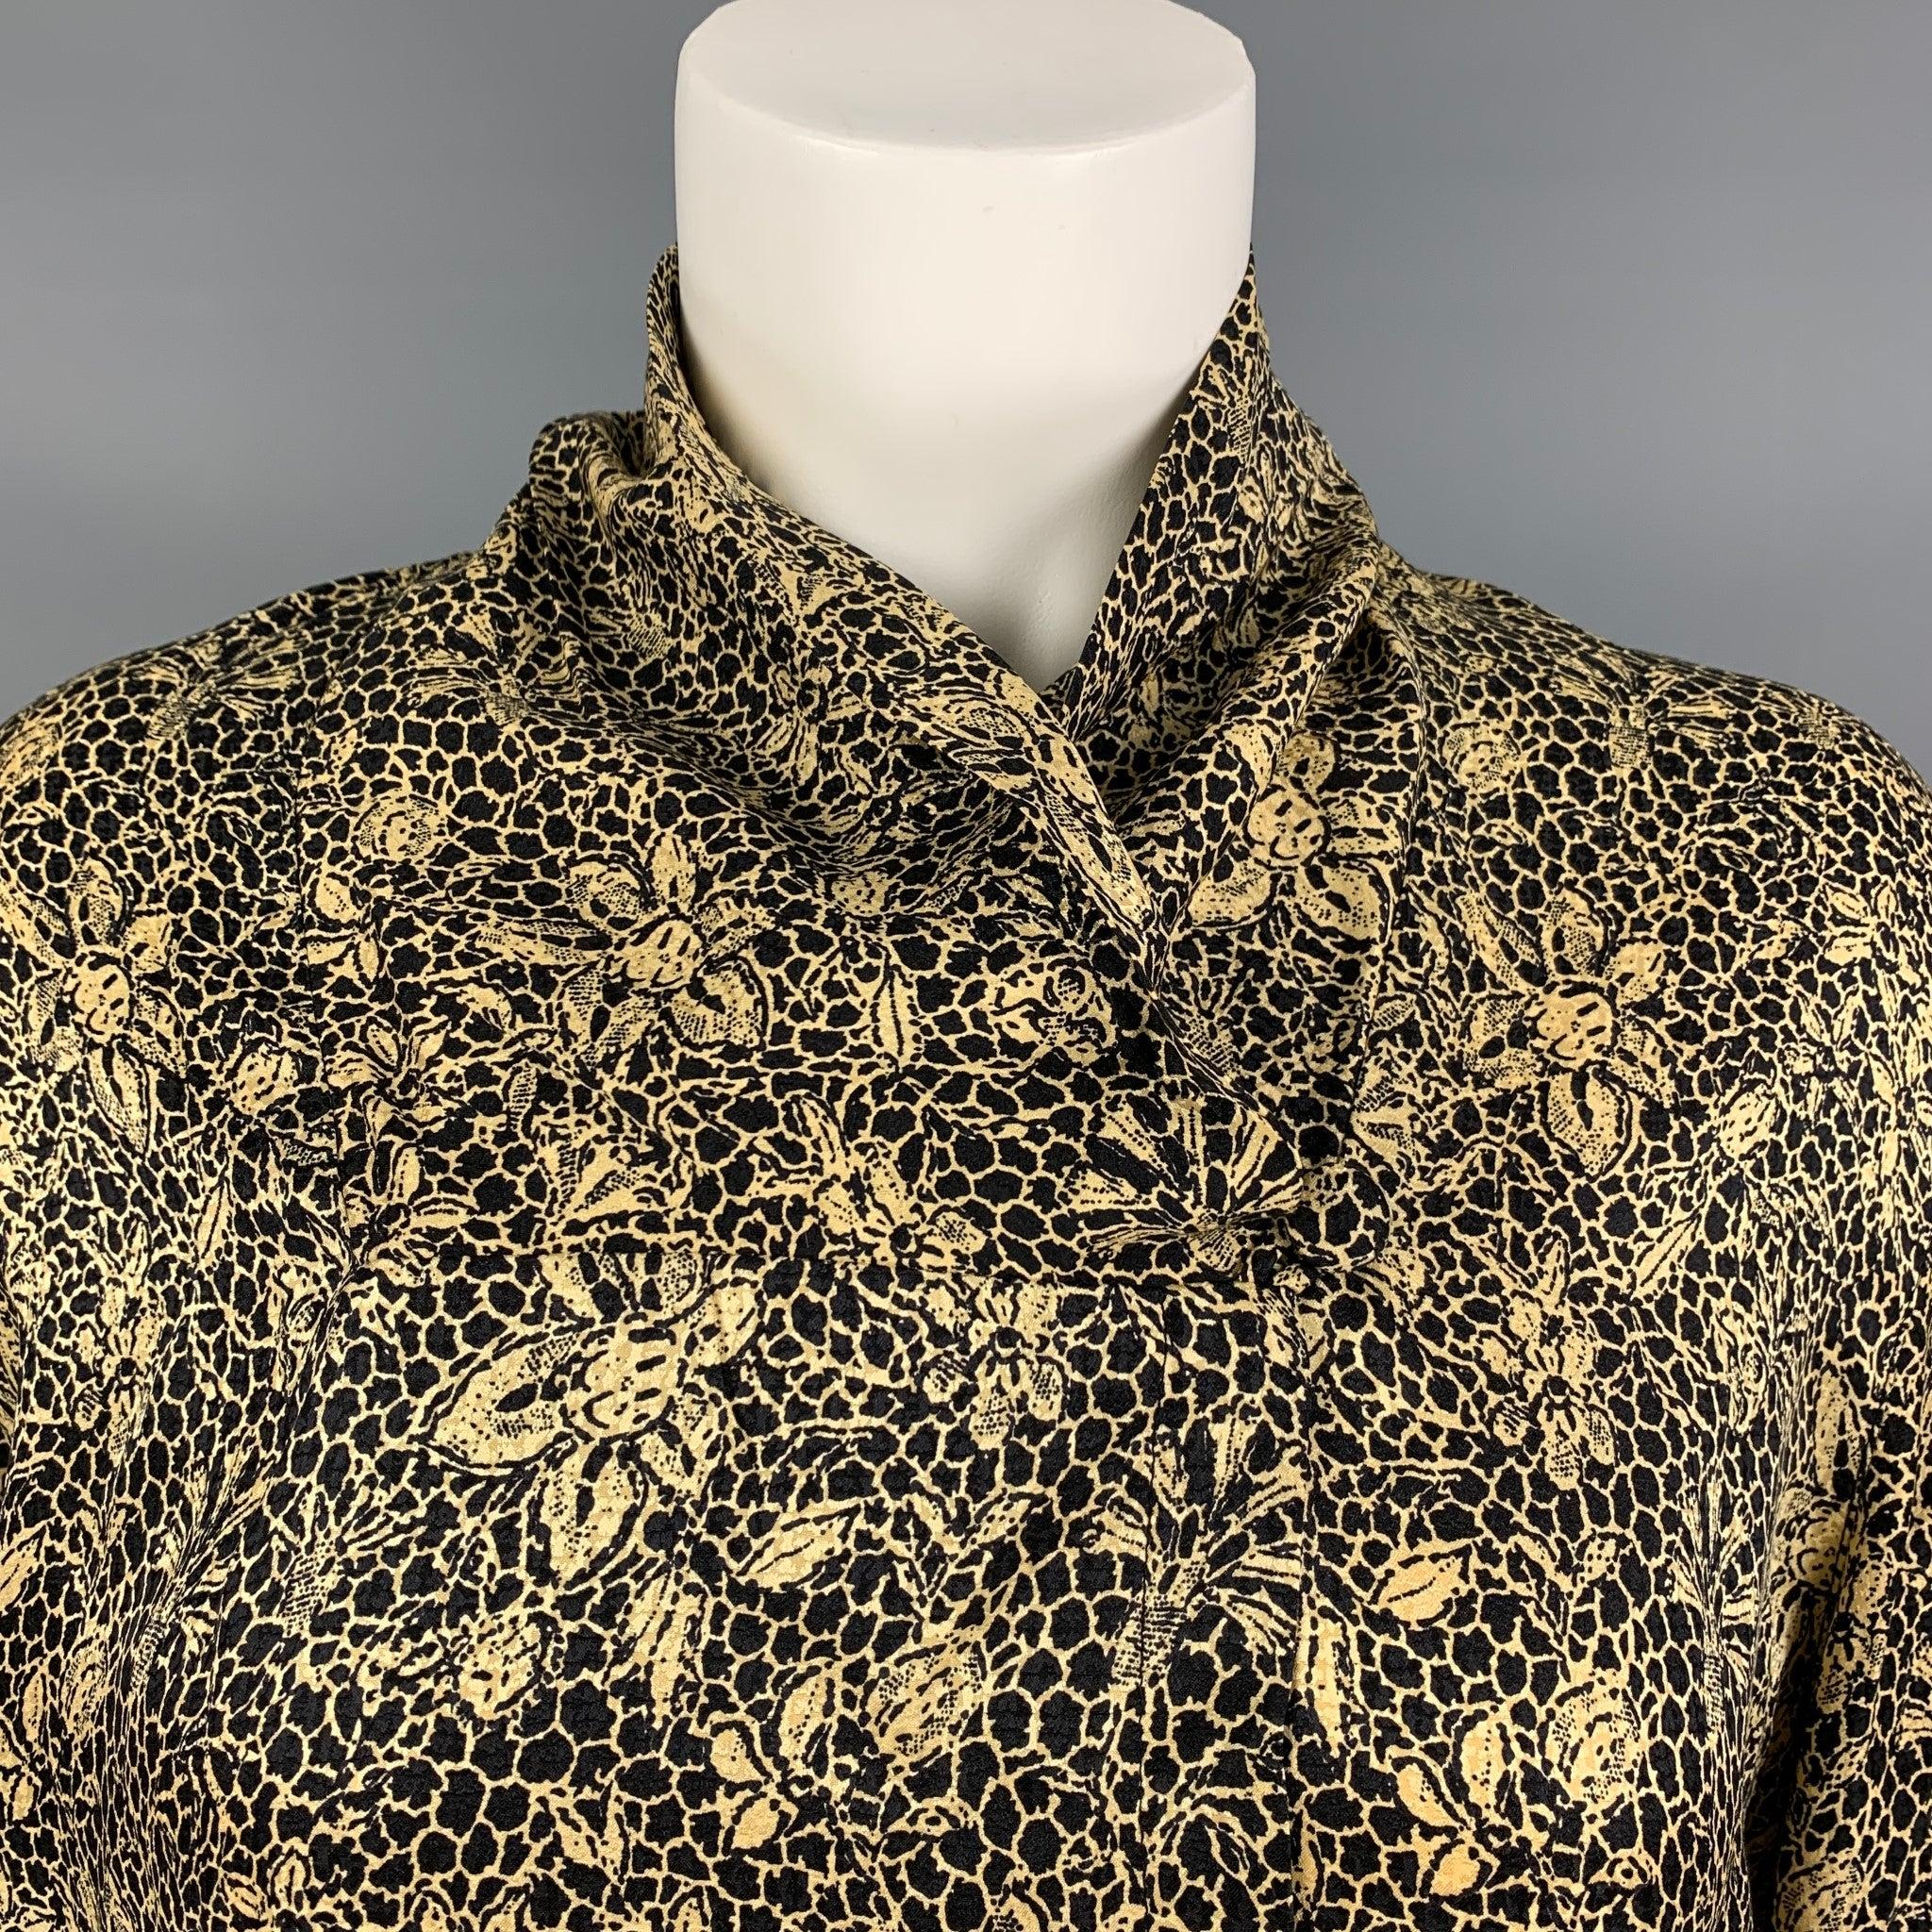 ANNE KLEIN long sleeves blouse comes in a black abstract floral silk fabric featuring single button closure. Made in USA.Excellent Pre-Owned Condition.  
 

 Marked:  6 
 

 Measurements: 
  
 Shoulder: 17 inches Bust: 42 inches Sleeve: 25 inches